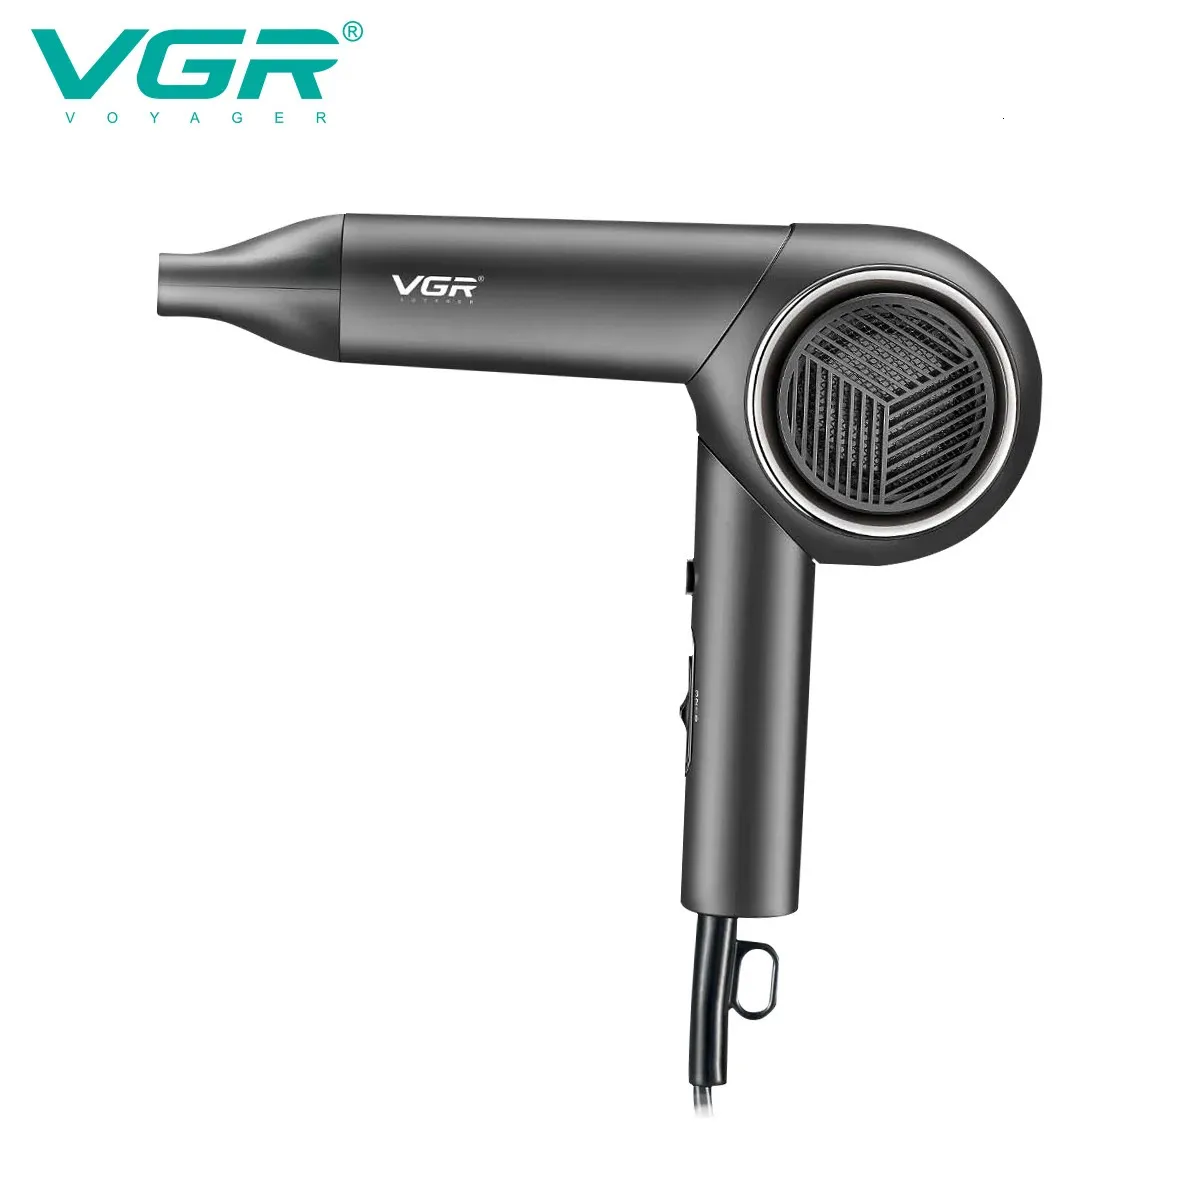 Hair Dryers VGR Dryer Professional Strong Wind Drying Portable Foldable Home Anion Thermostatic Overheating Protection V420 231128